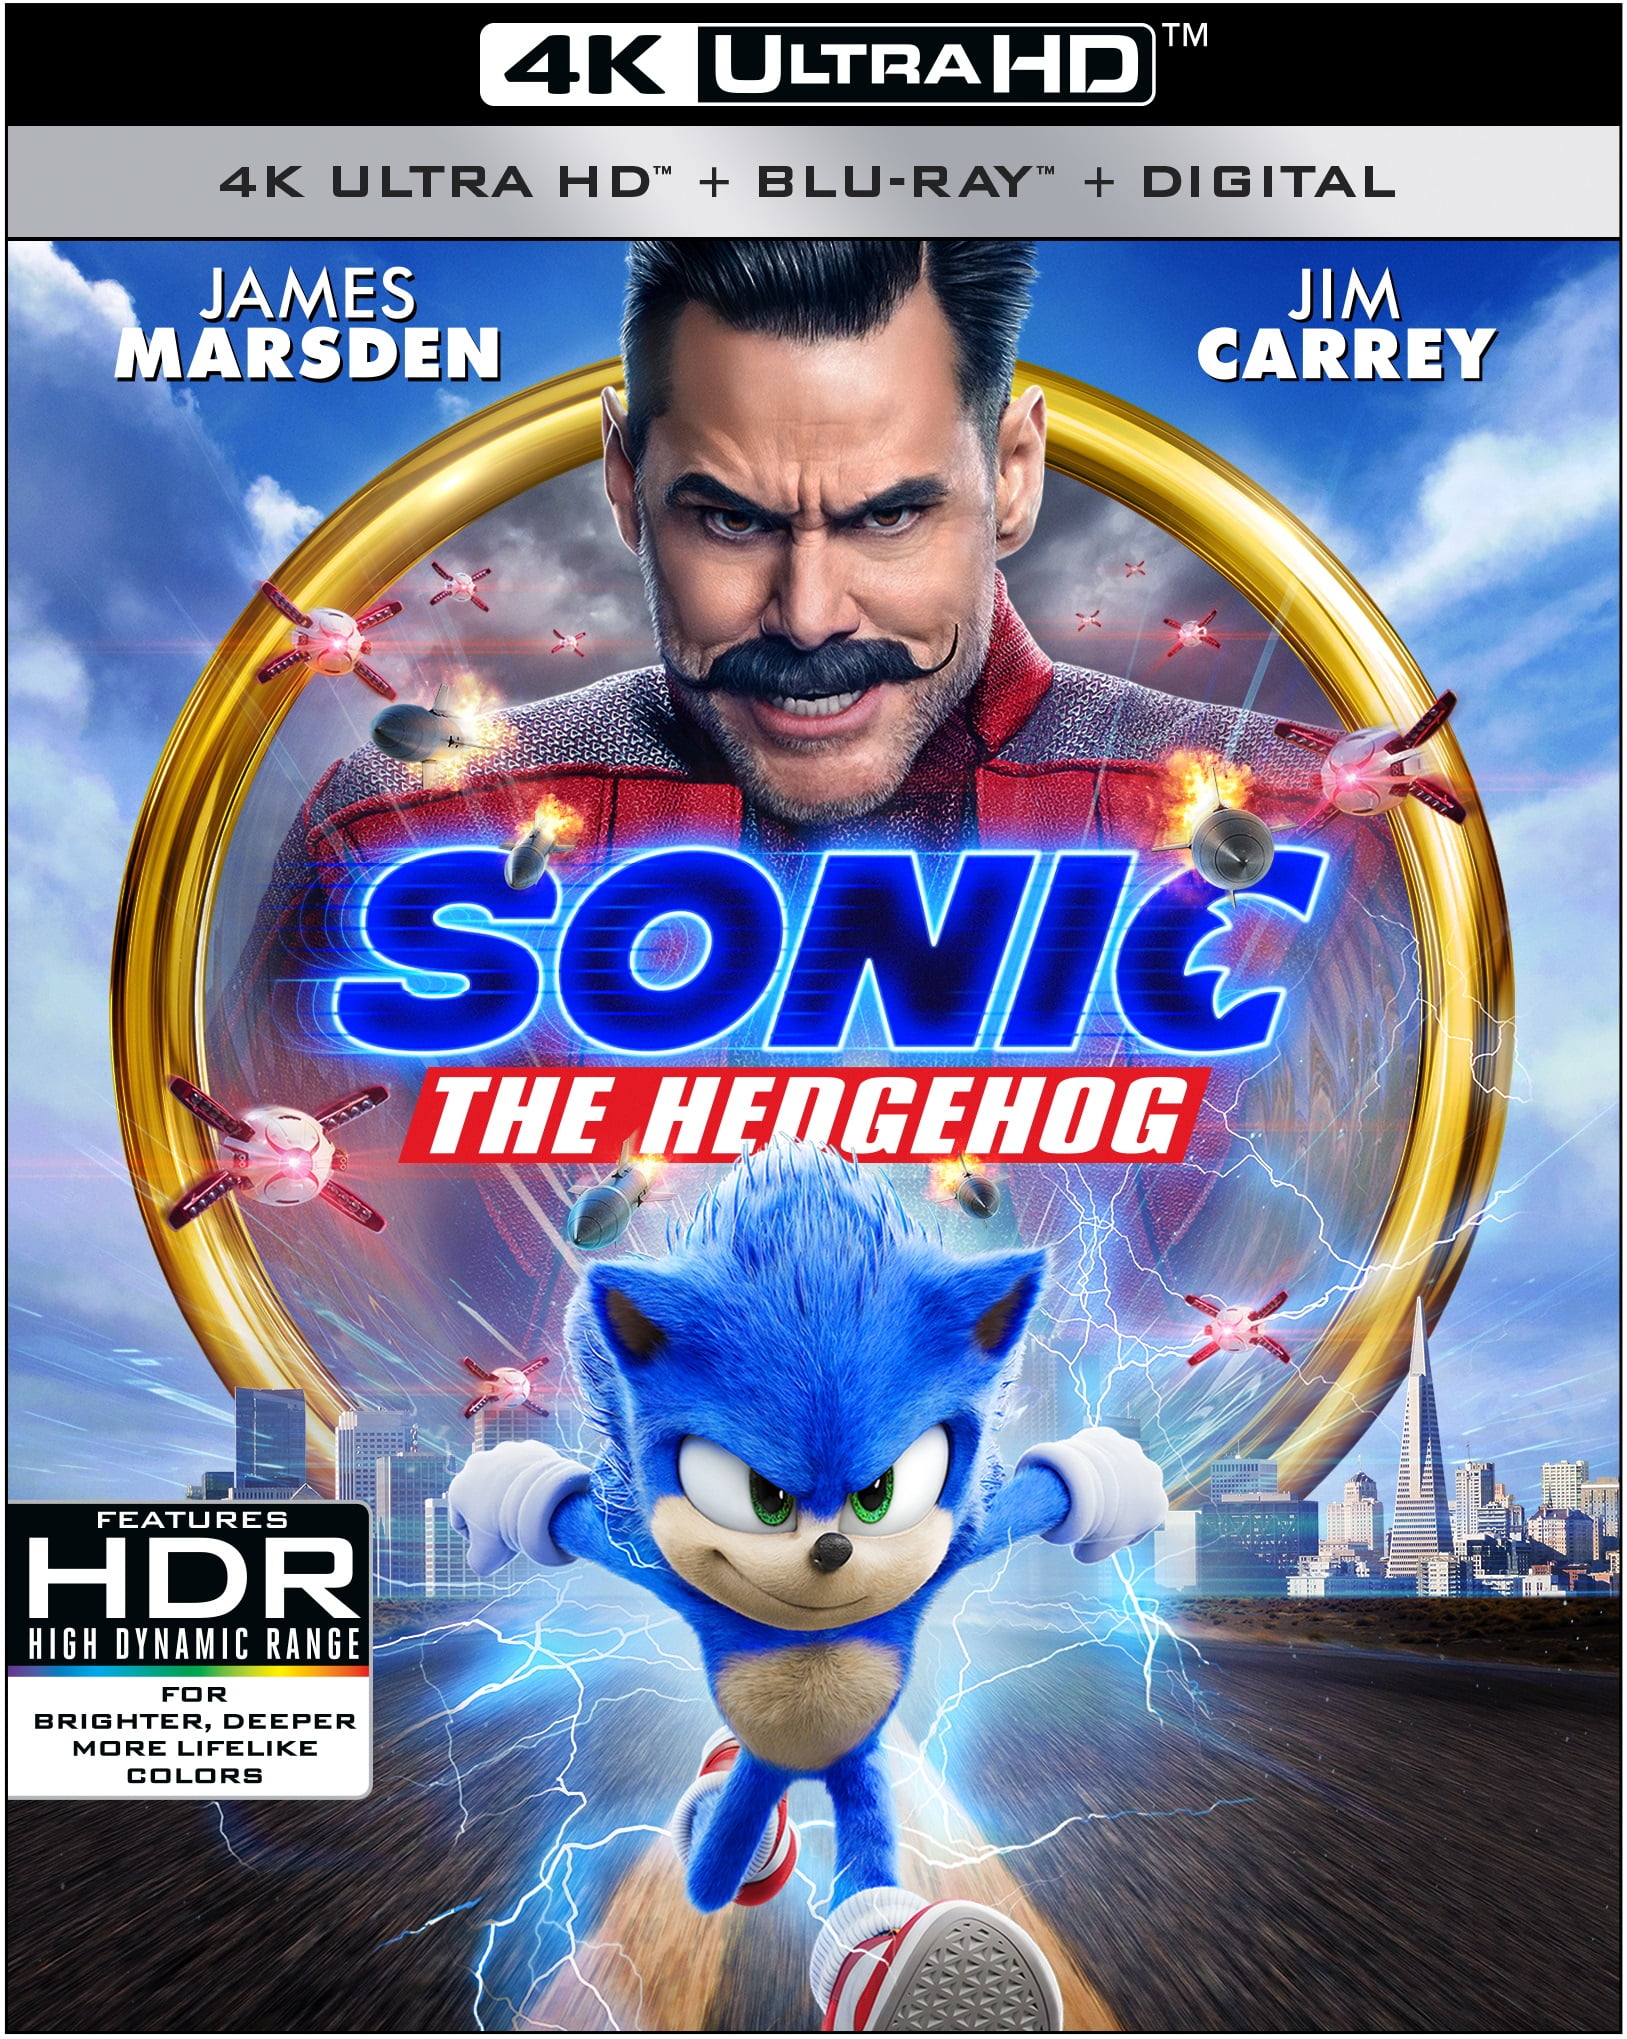 20 Top Images Sonic The Hedgehog Movie Free Online : Sonic the Hedgehog - 123movies | Watch Online Full Movies ...